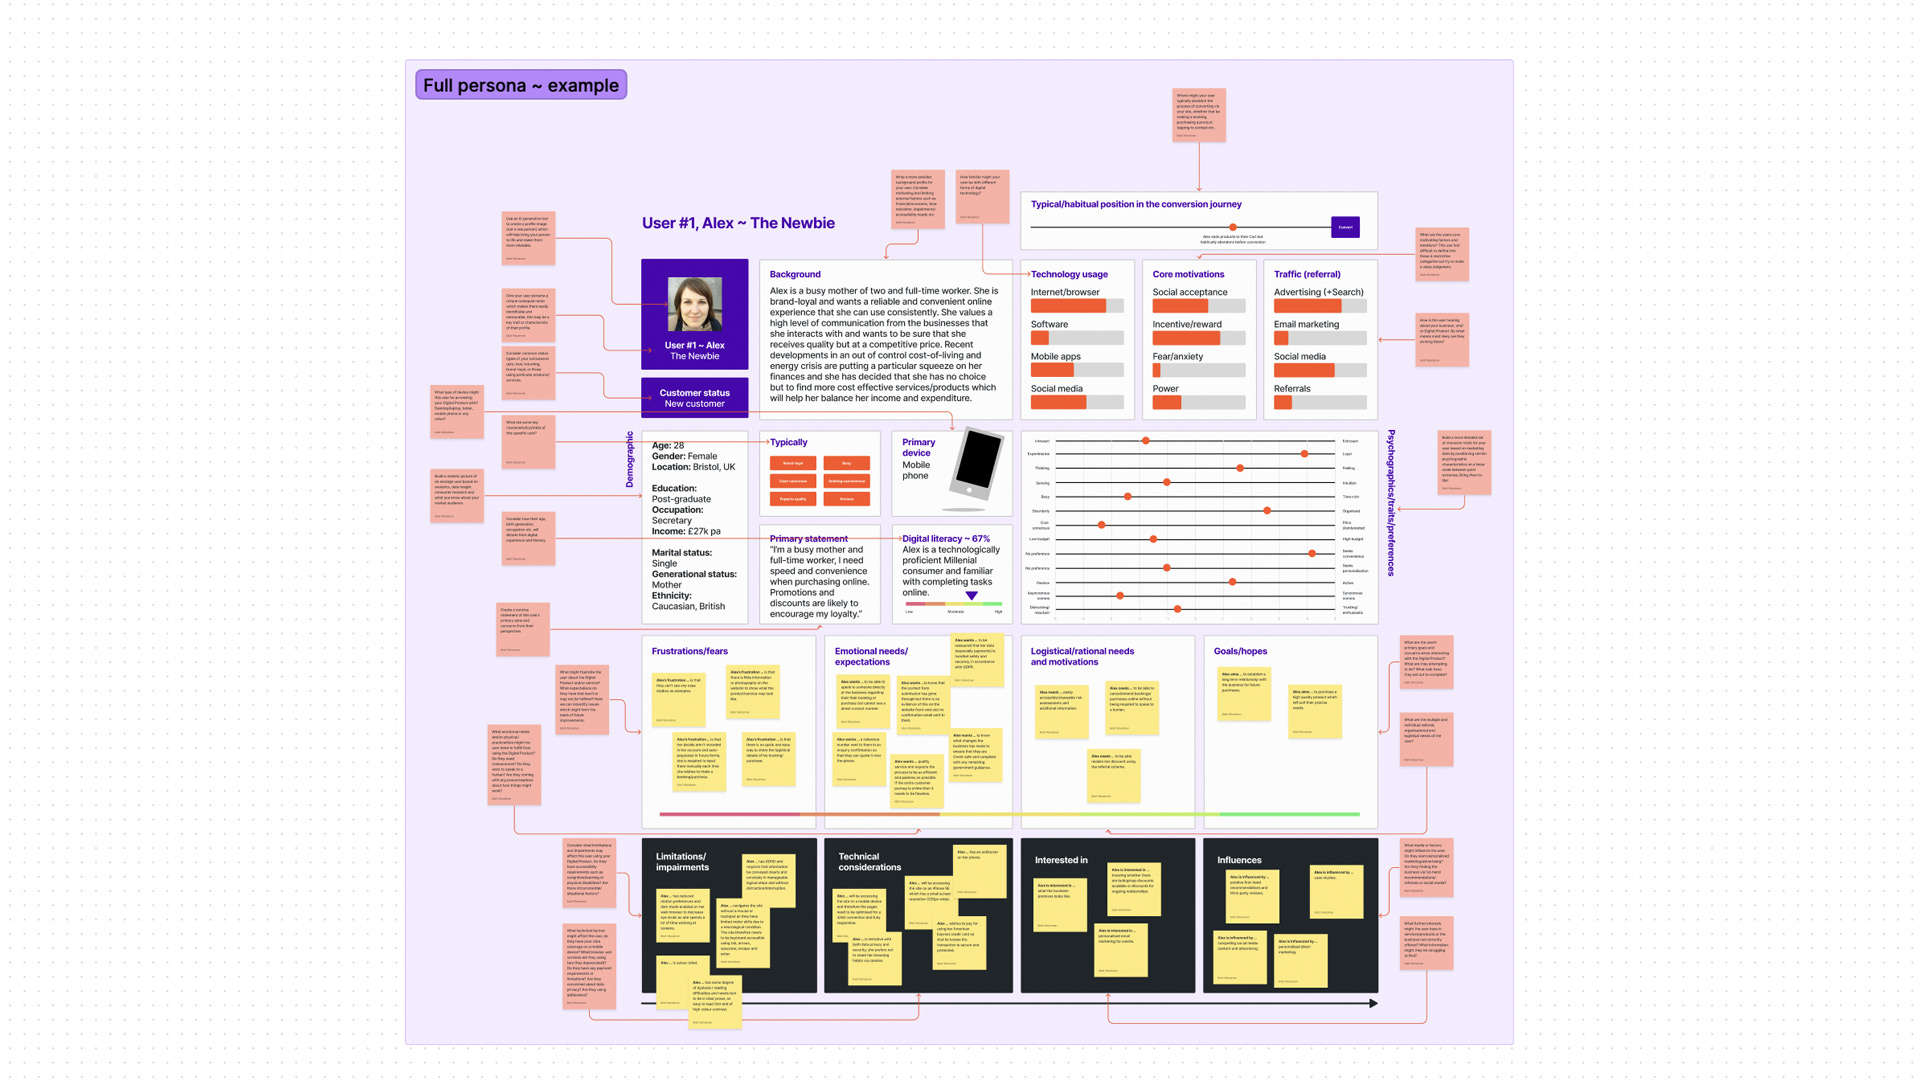 An annotated user persona diagram drawn up in FigJam